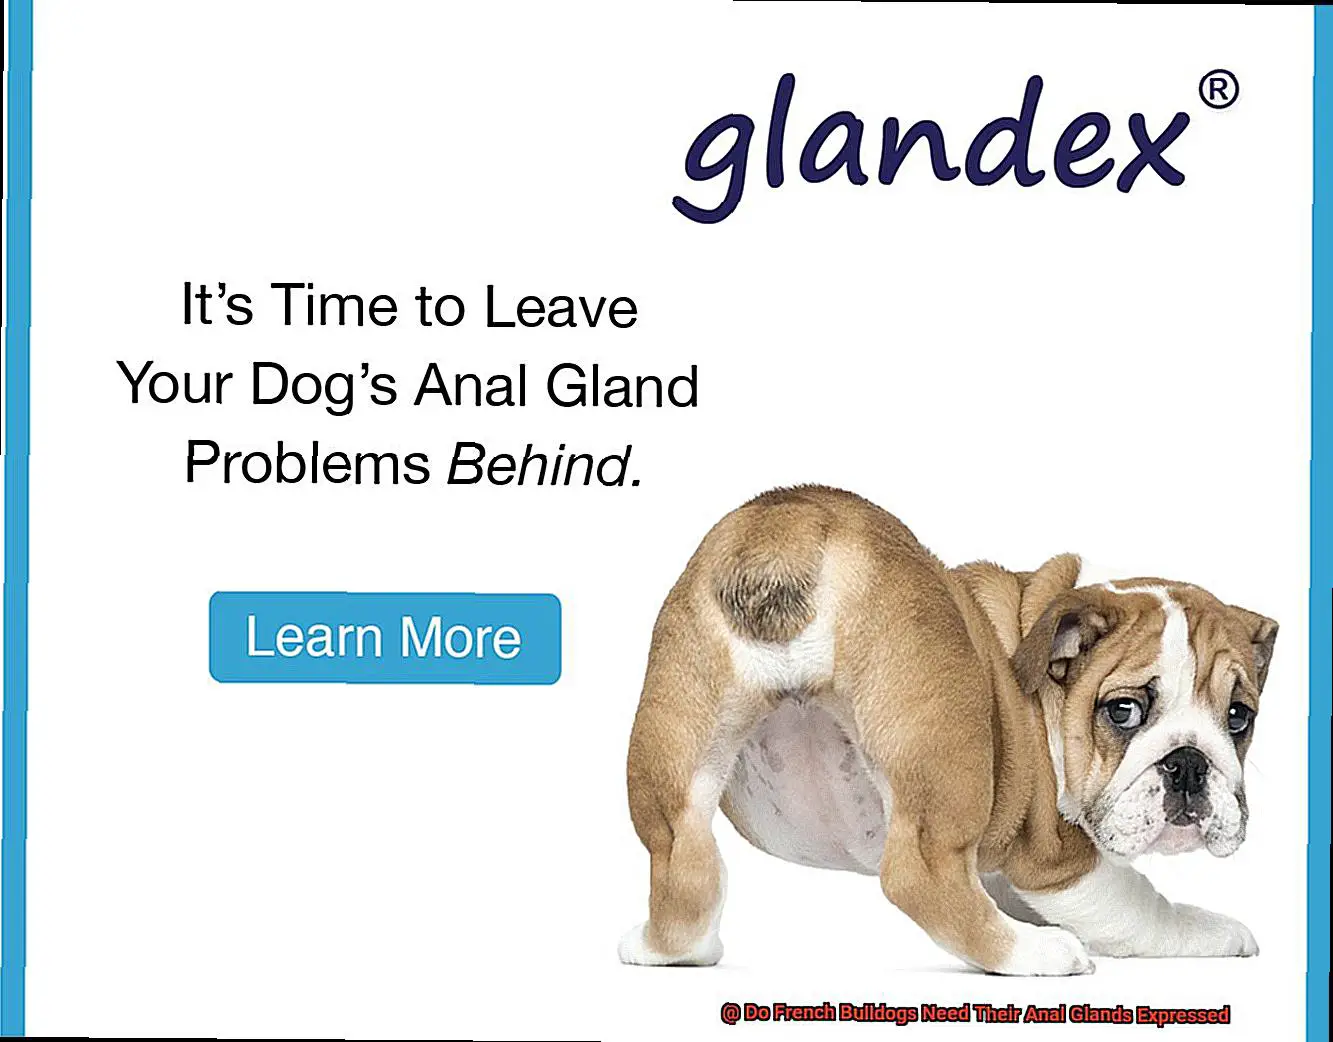 Do French Bulldogs Need Their Anal Glands Expressed-2